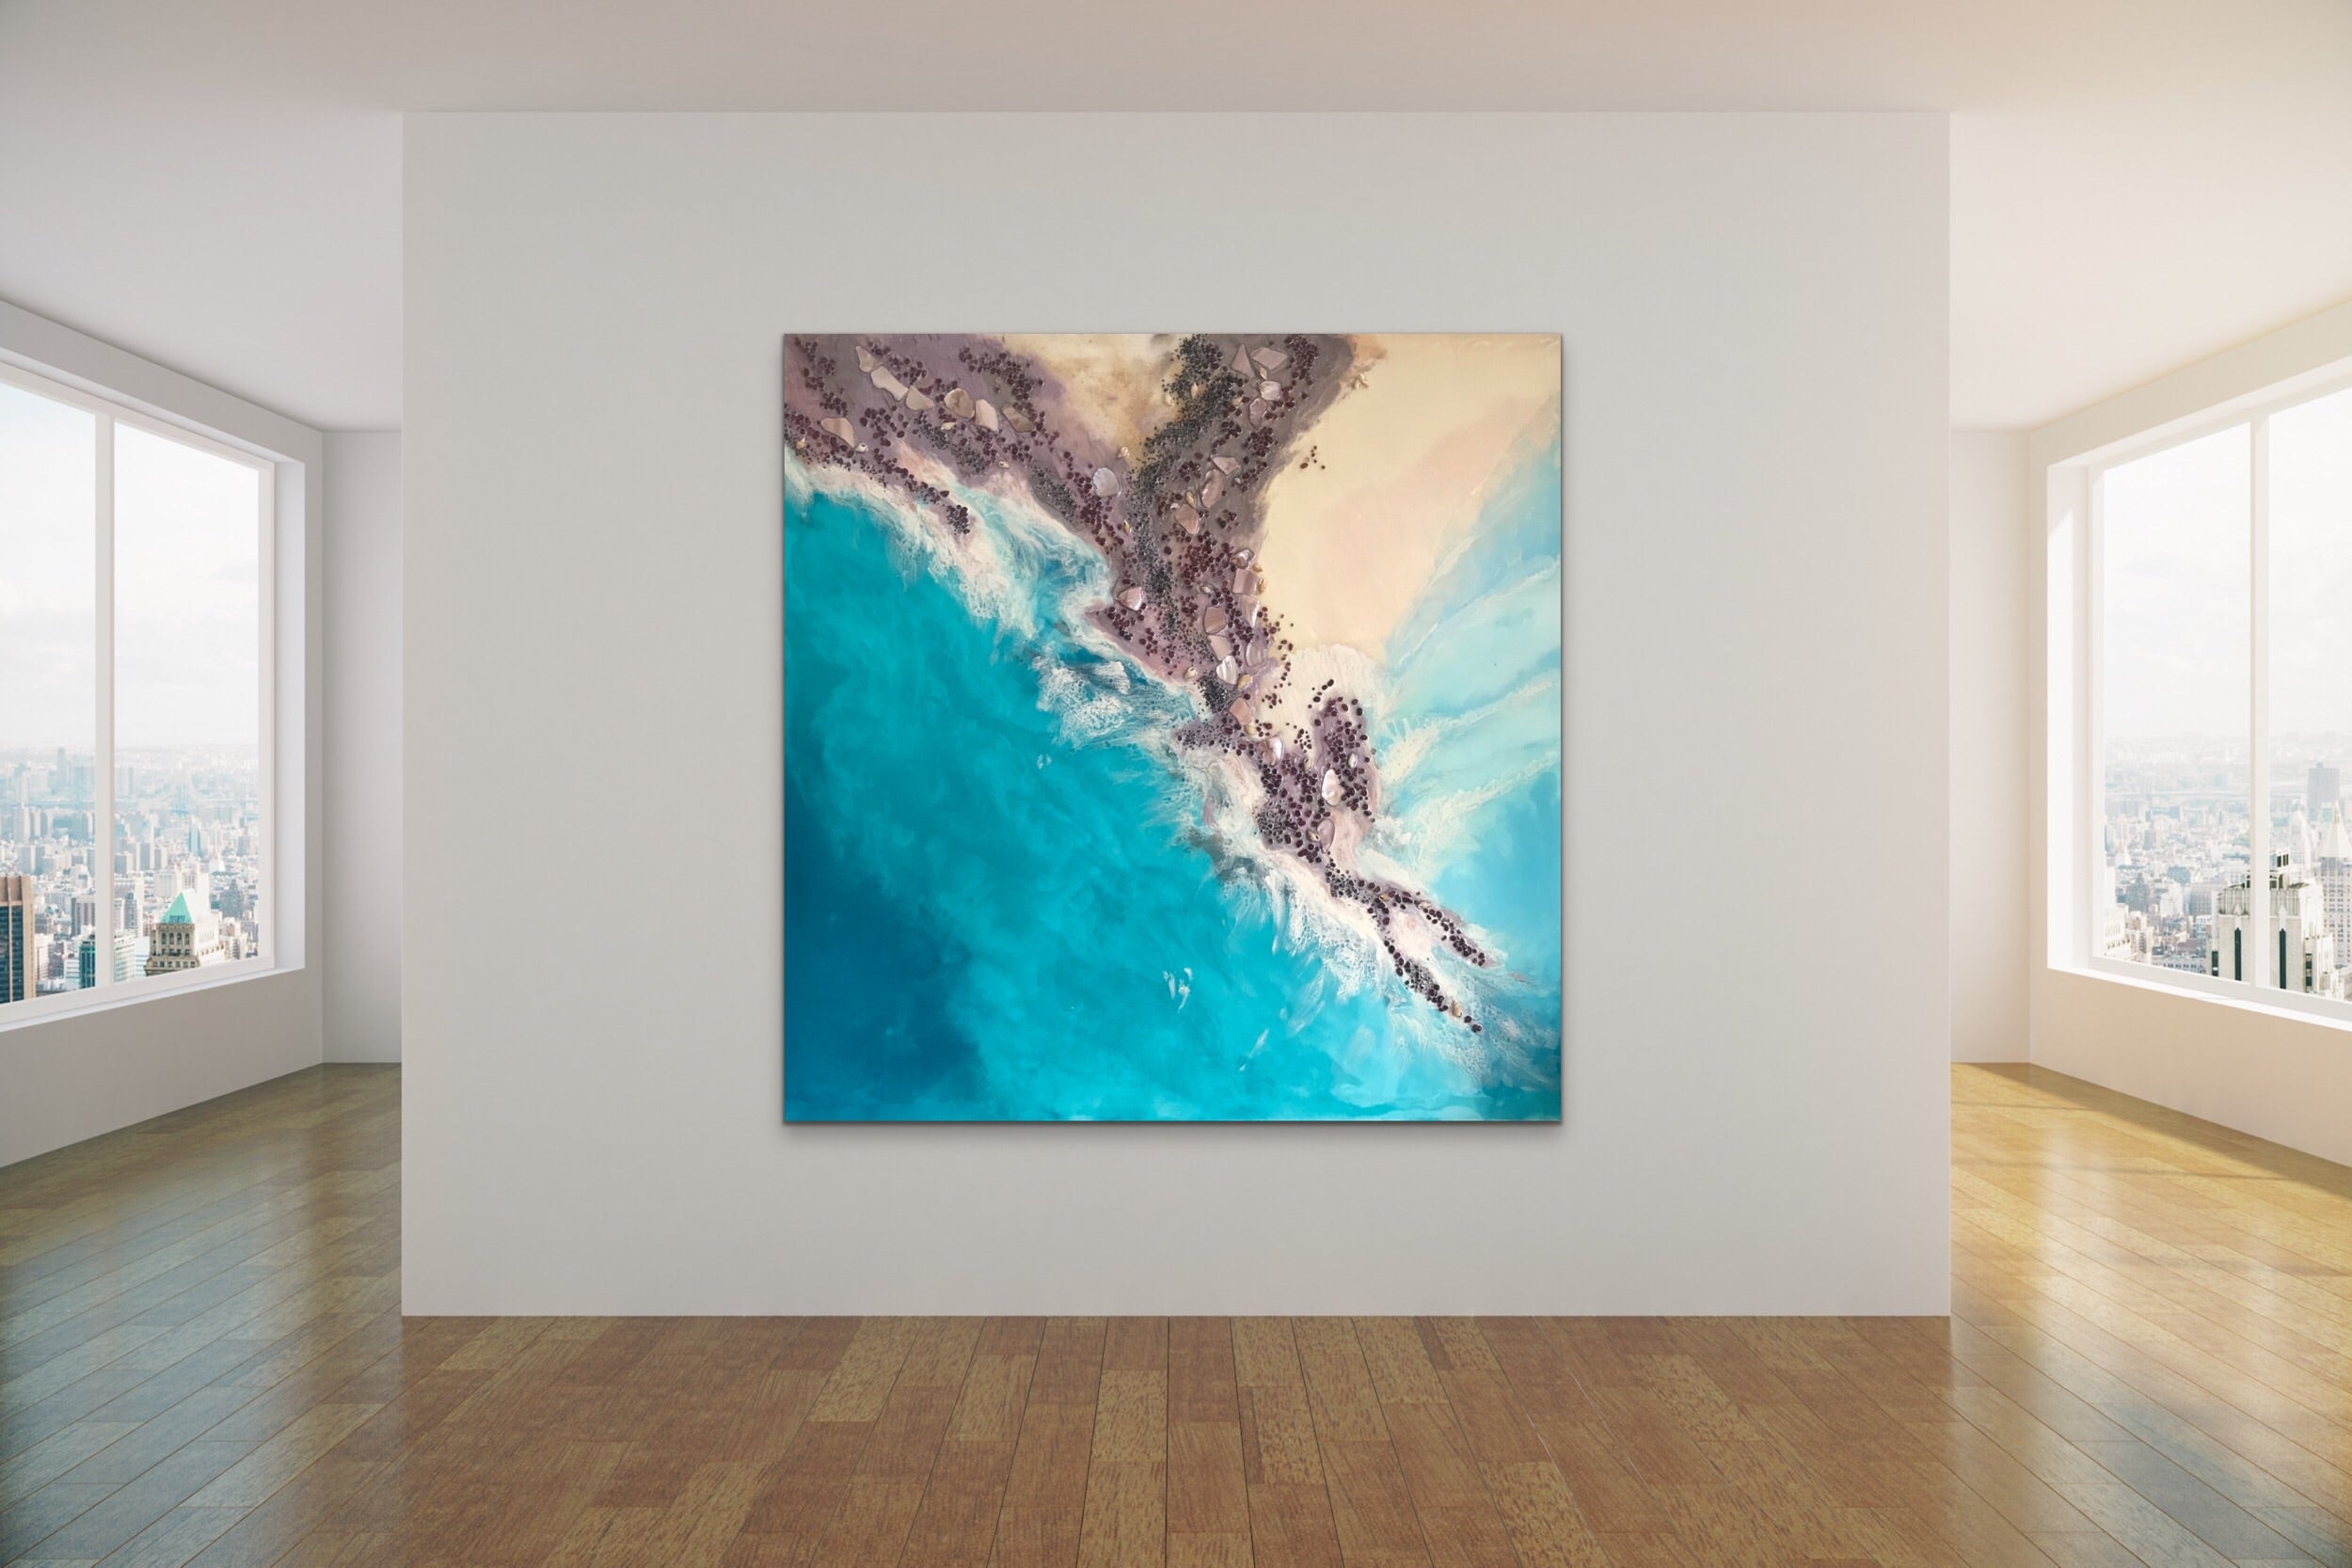 Teal Blue Ocean Wave. Byron Bay Magic. Original Artwork. Antuanelle 3 Magic with Mussels and Garnet. Abstract Seascape 90x90cm